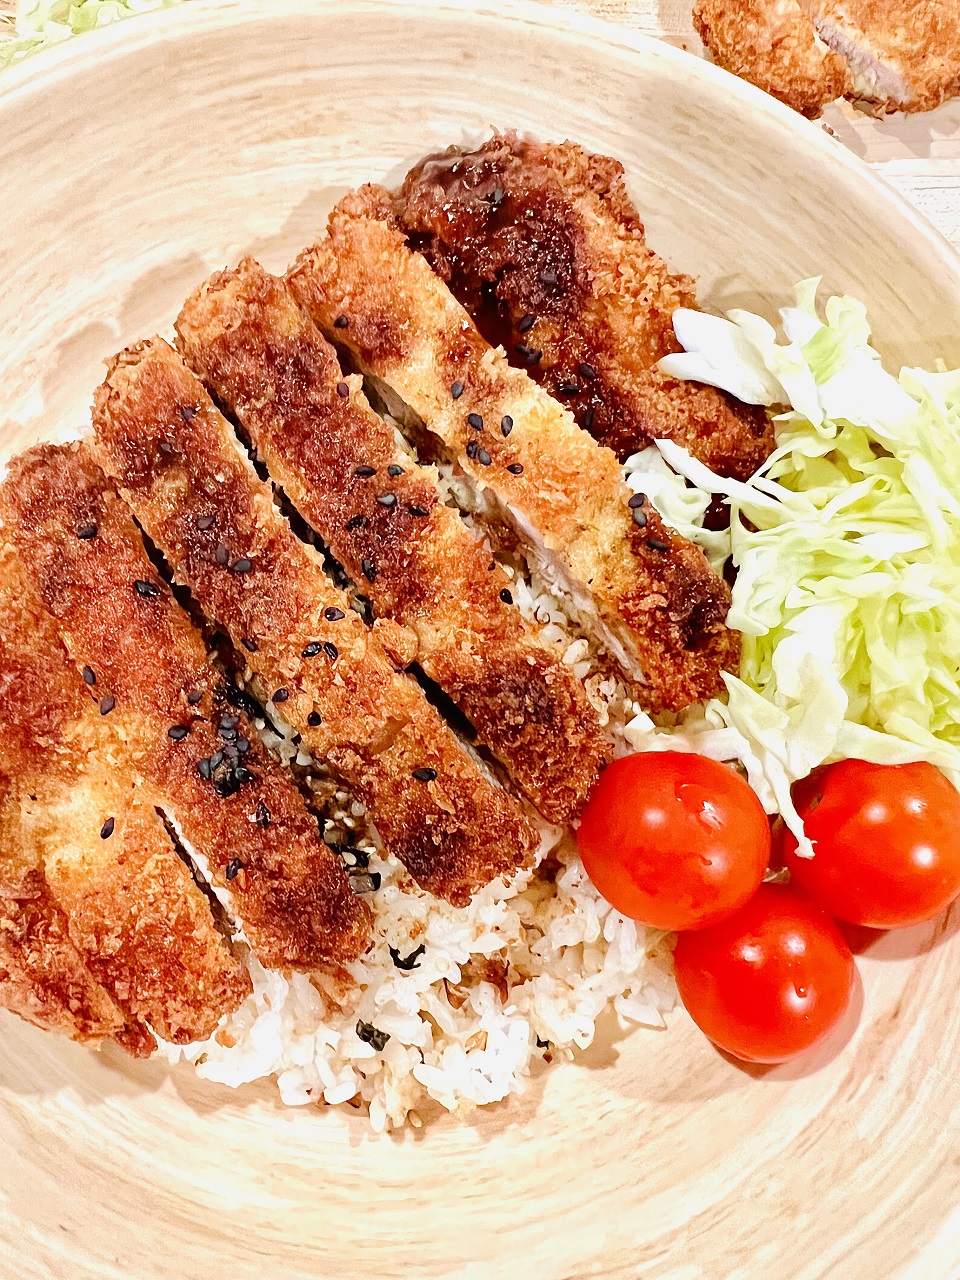 Pork Tonkatsu on white rice with shredded cabbage and cherry tomatoes